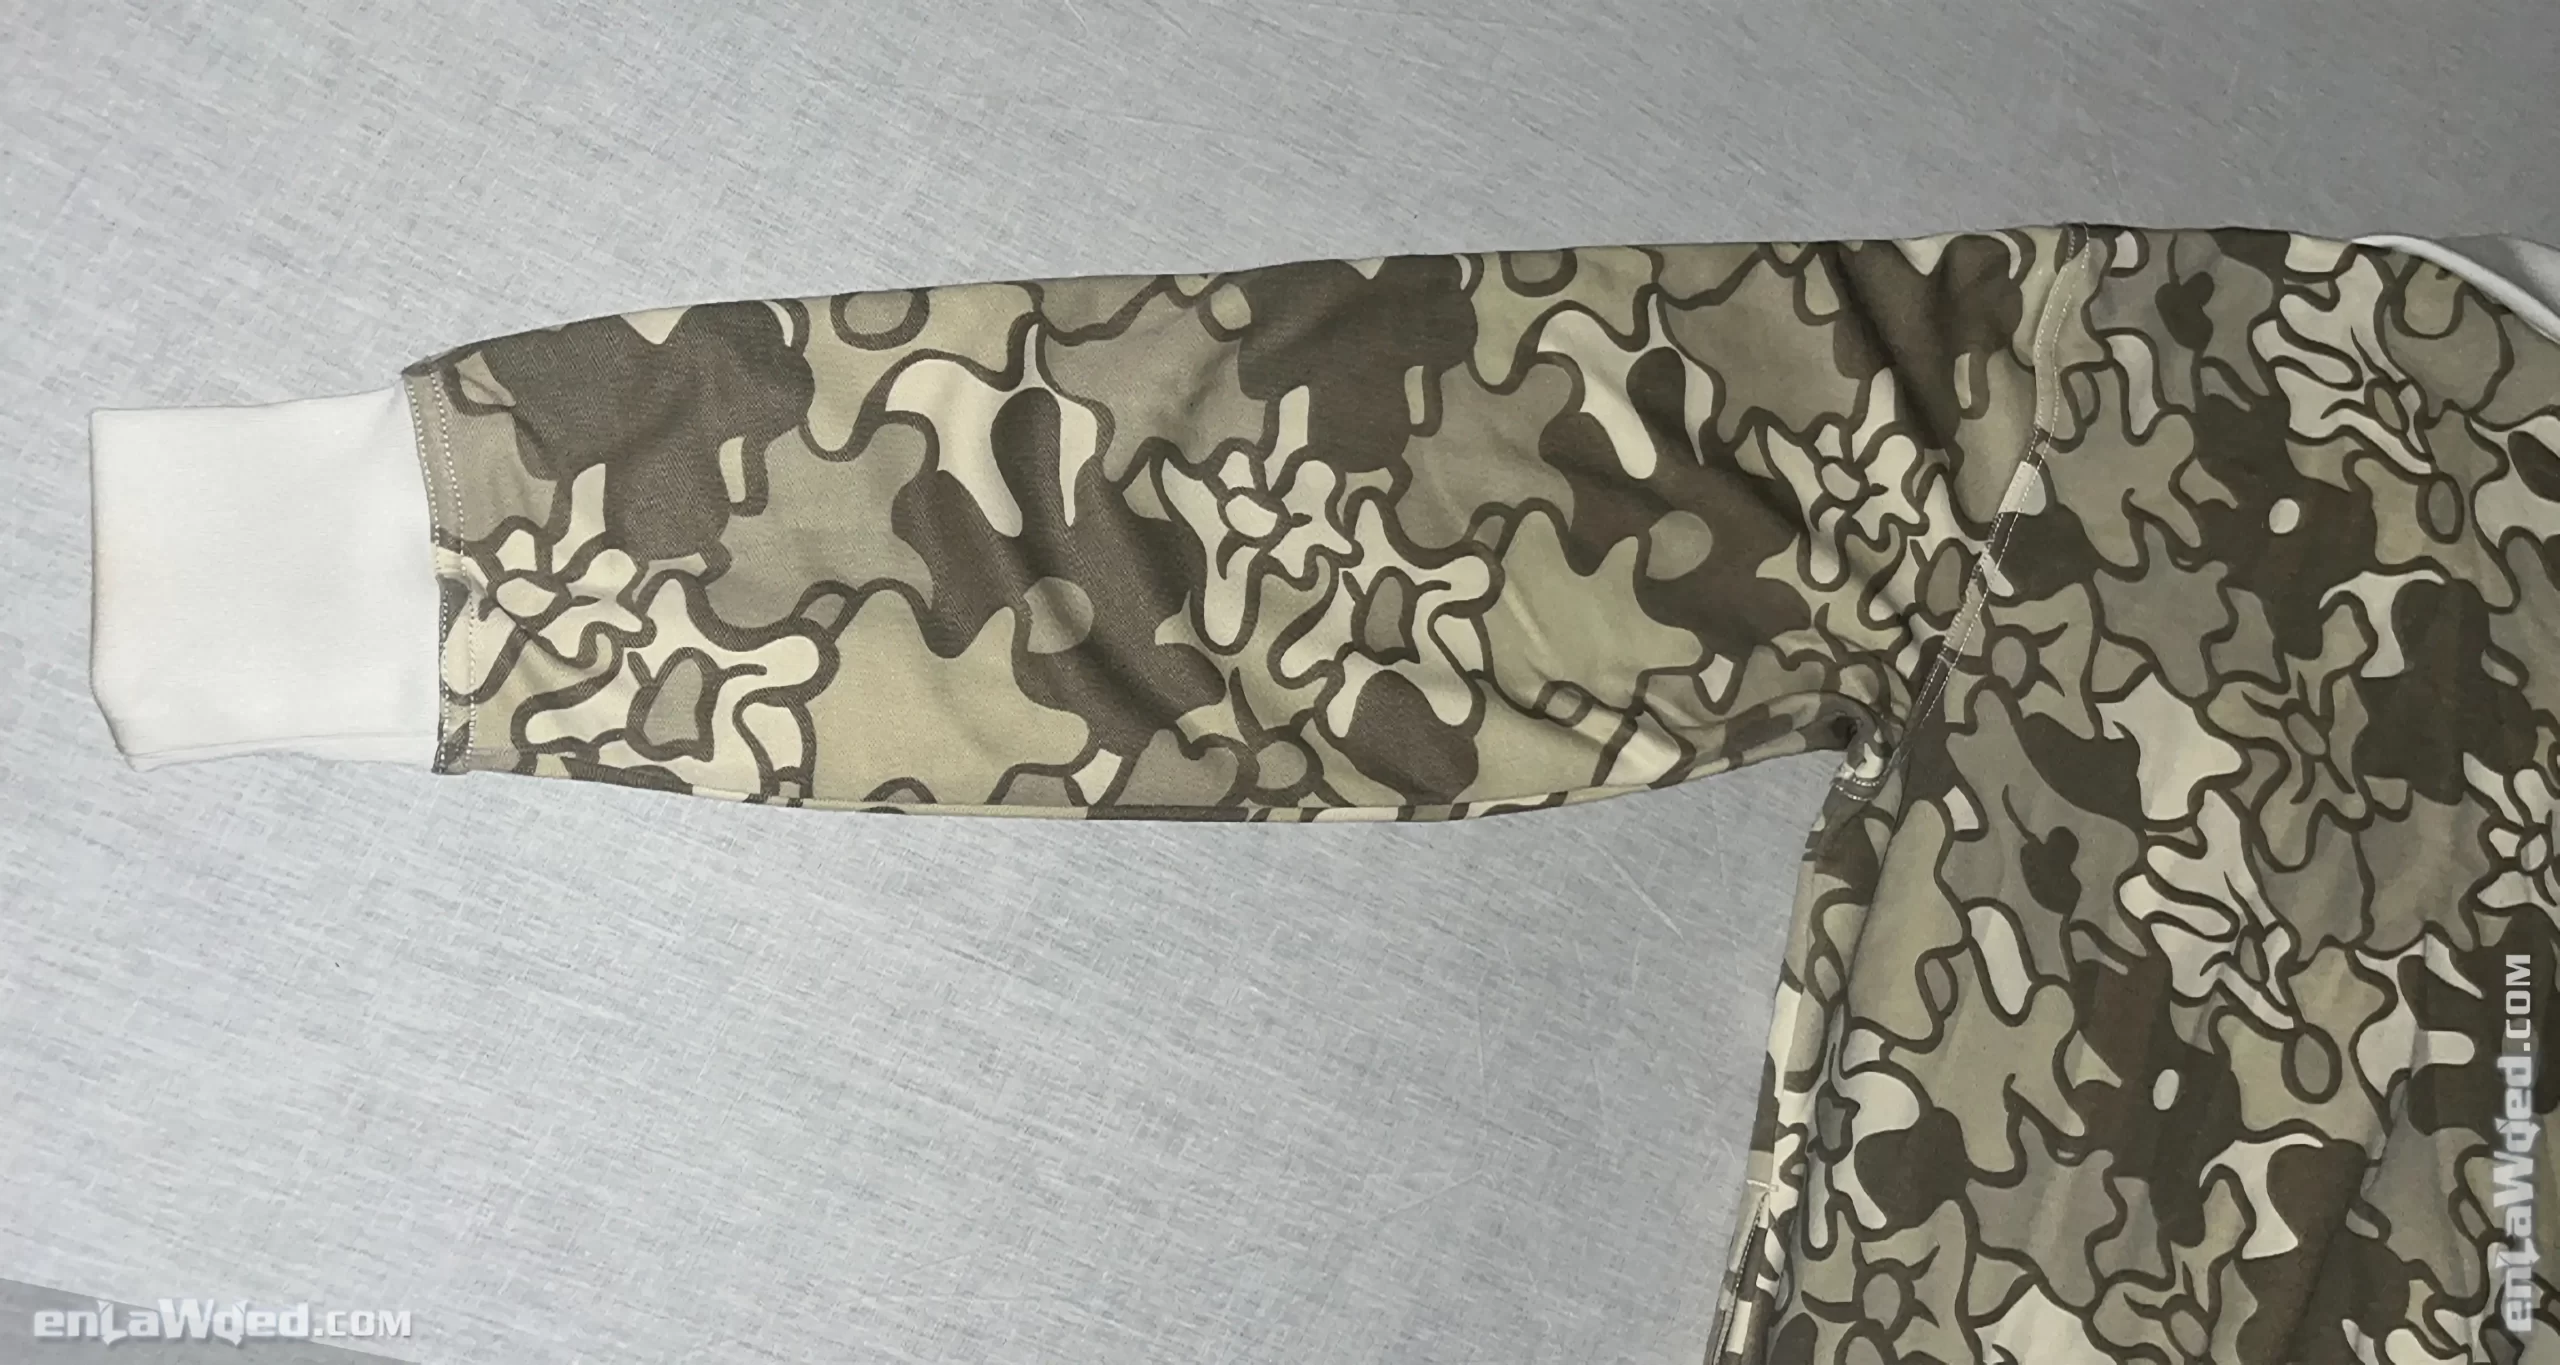 Men’s 2007 Adidas Originals Beige Safety Camo Track Top: Perspective (EnLawded.com file #lp1niauv126112wb50vwfibe)